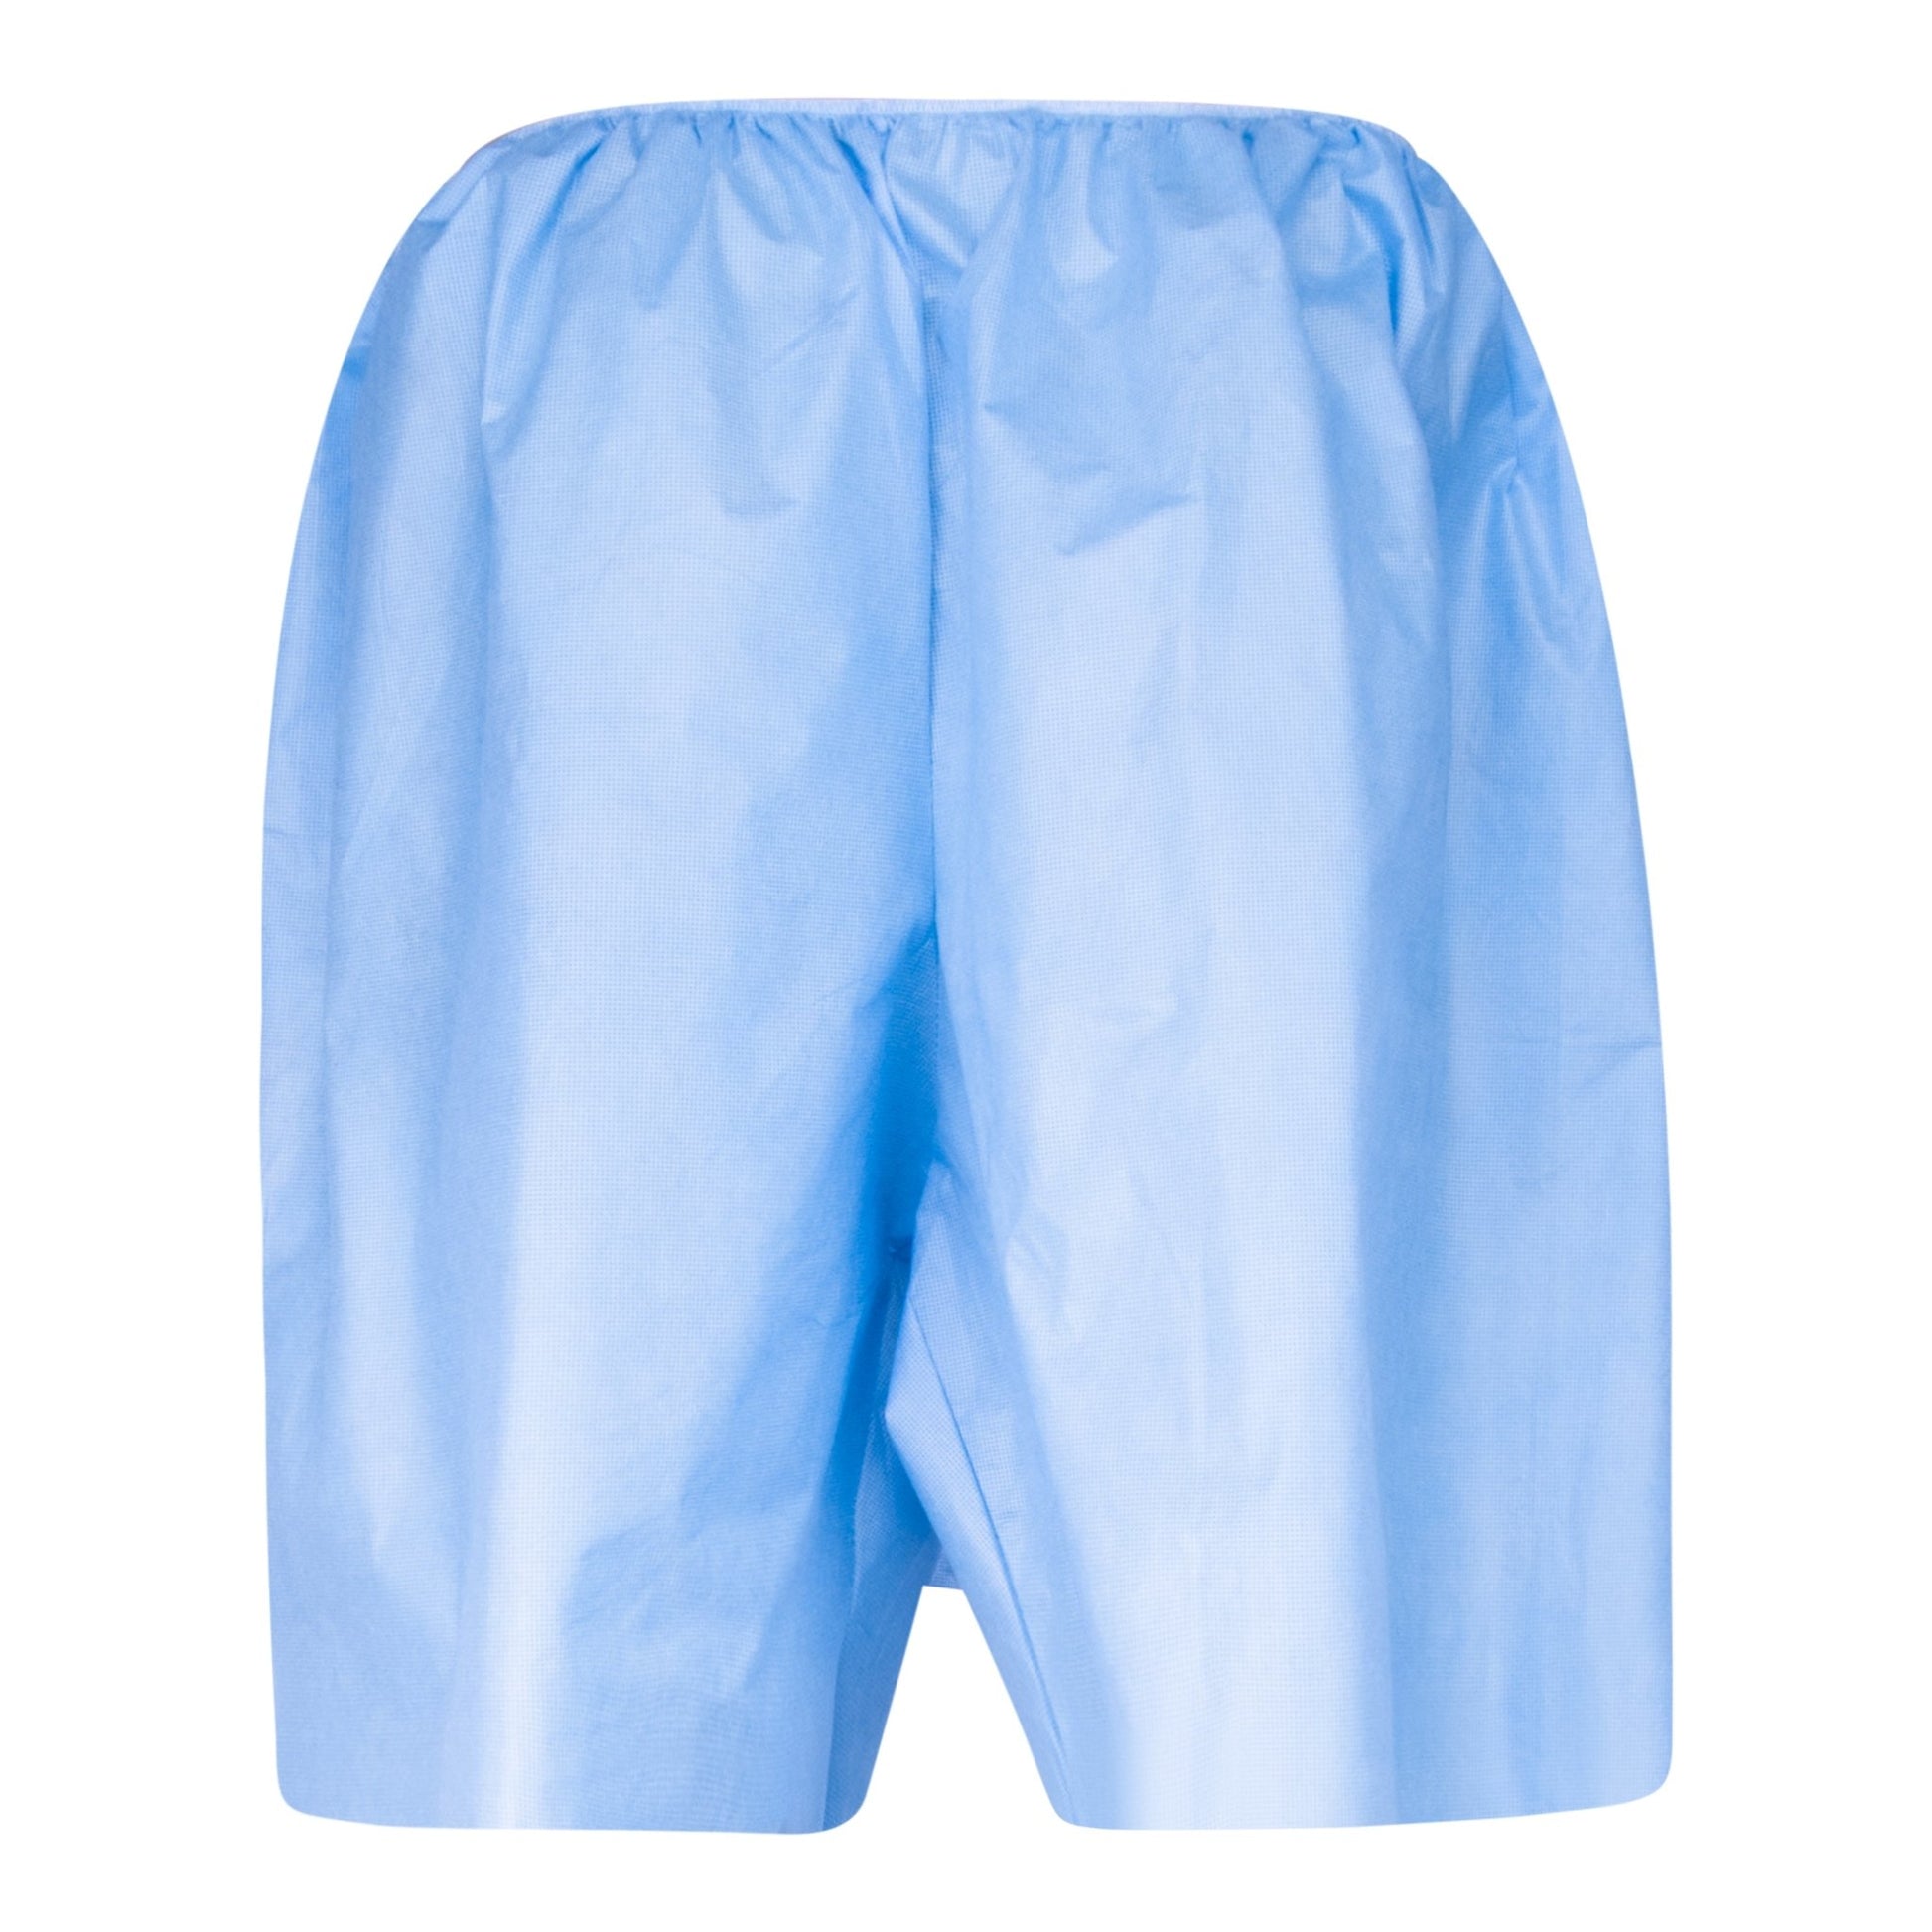 Disposable Urology Exam Shorts - 50 pack - DisposableGowns.com